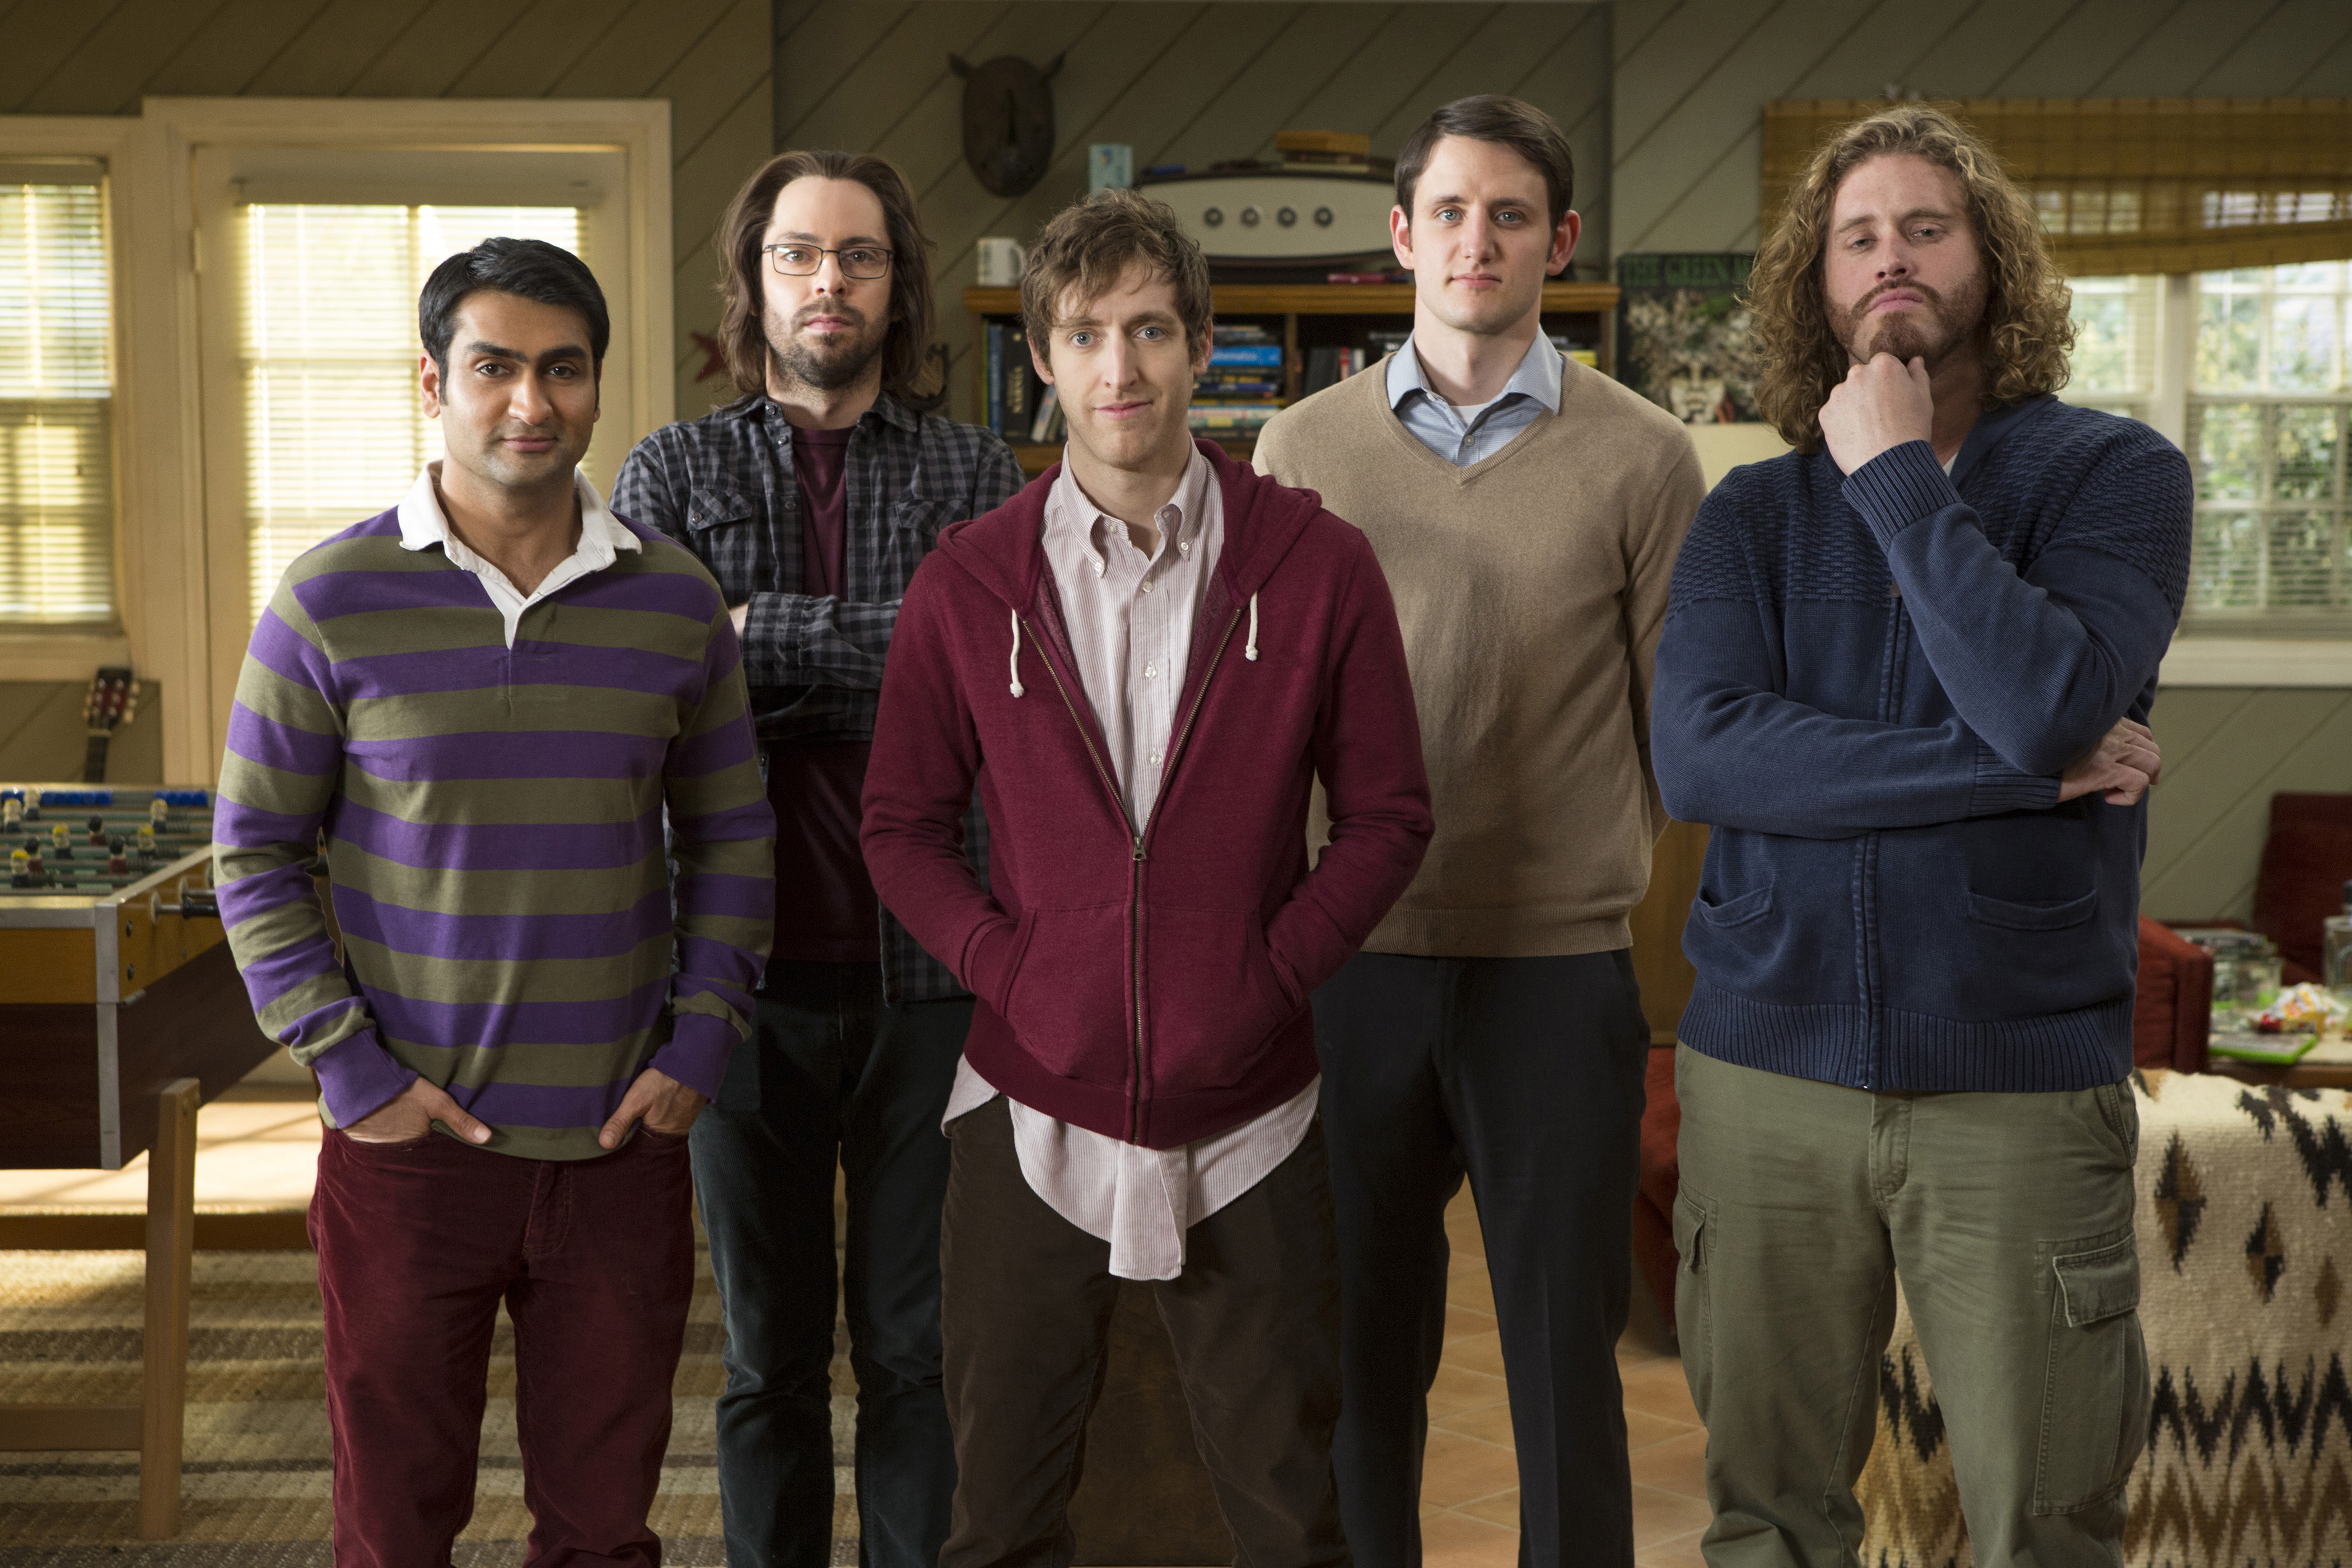 Silicon Valley' Embarks On A Tech Venture In New Trailer For Season 4